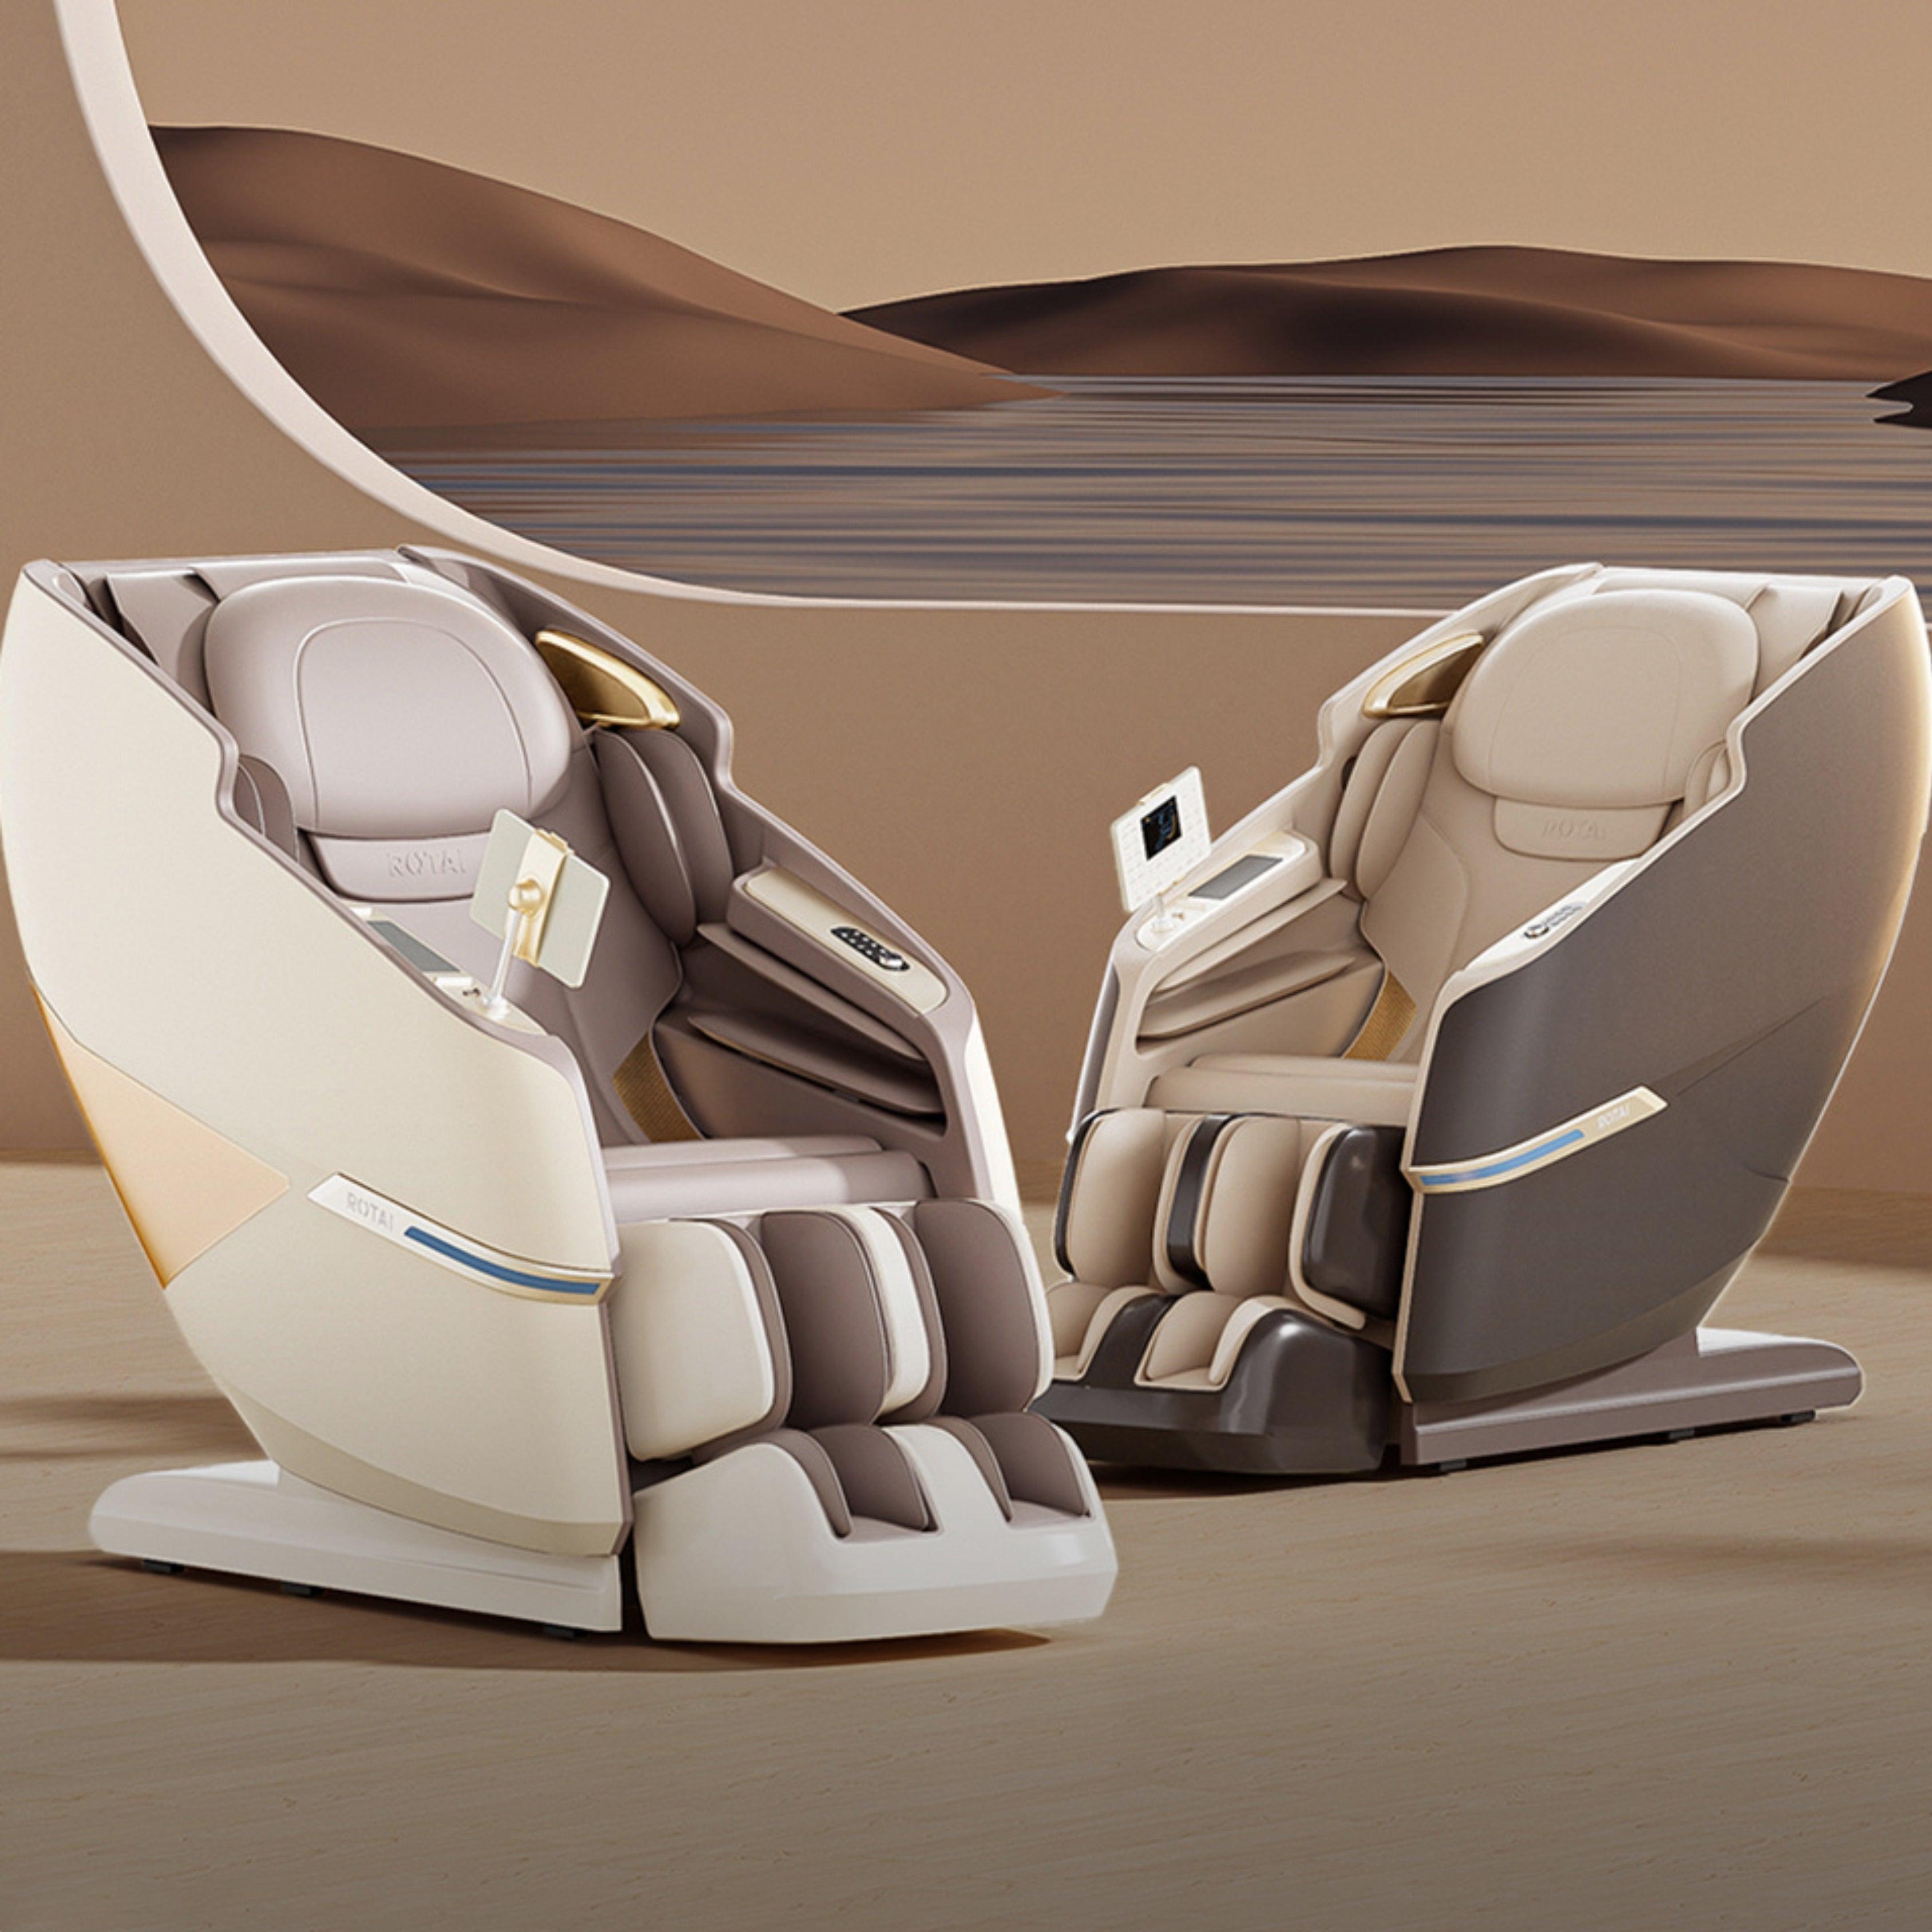 Two Royal Magestic Pro Massage Chairs in brown and beige, featuring 3D Movement and AI Smart Massage technology, best massage chairs in UAE